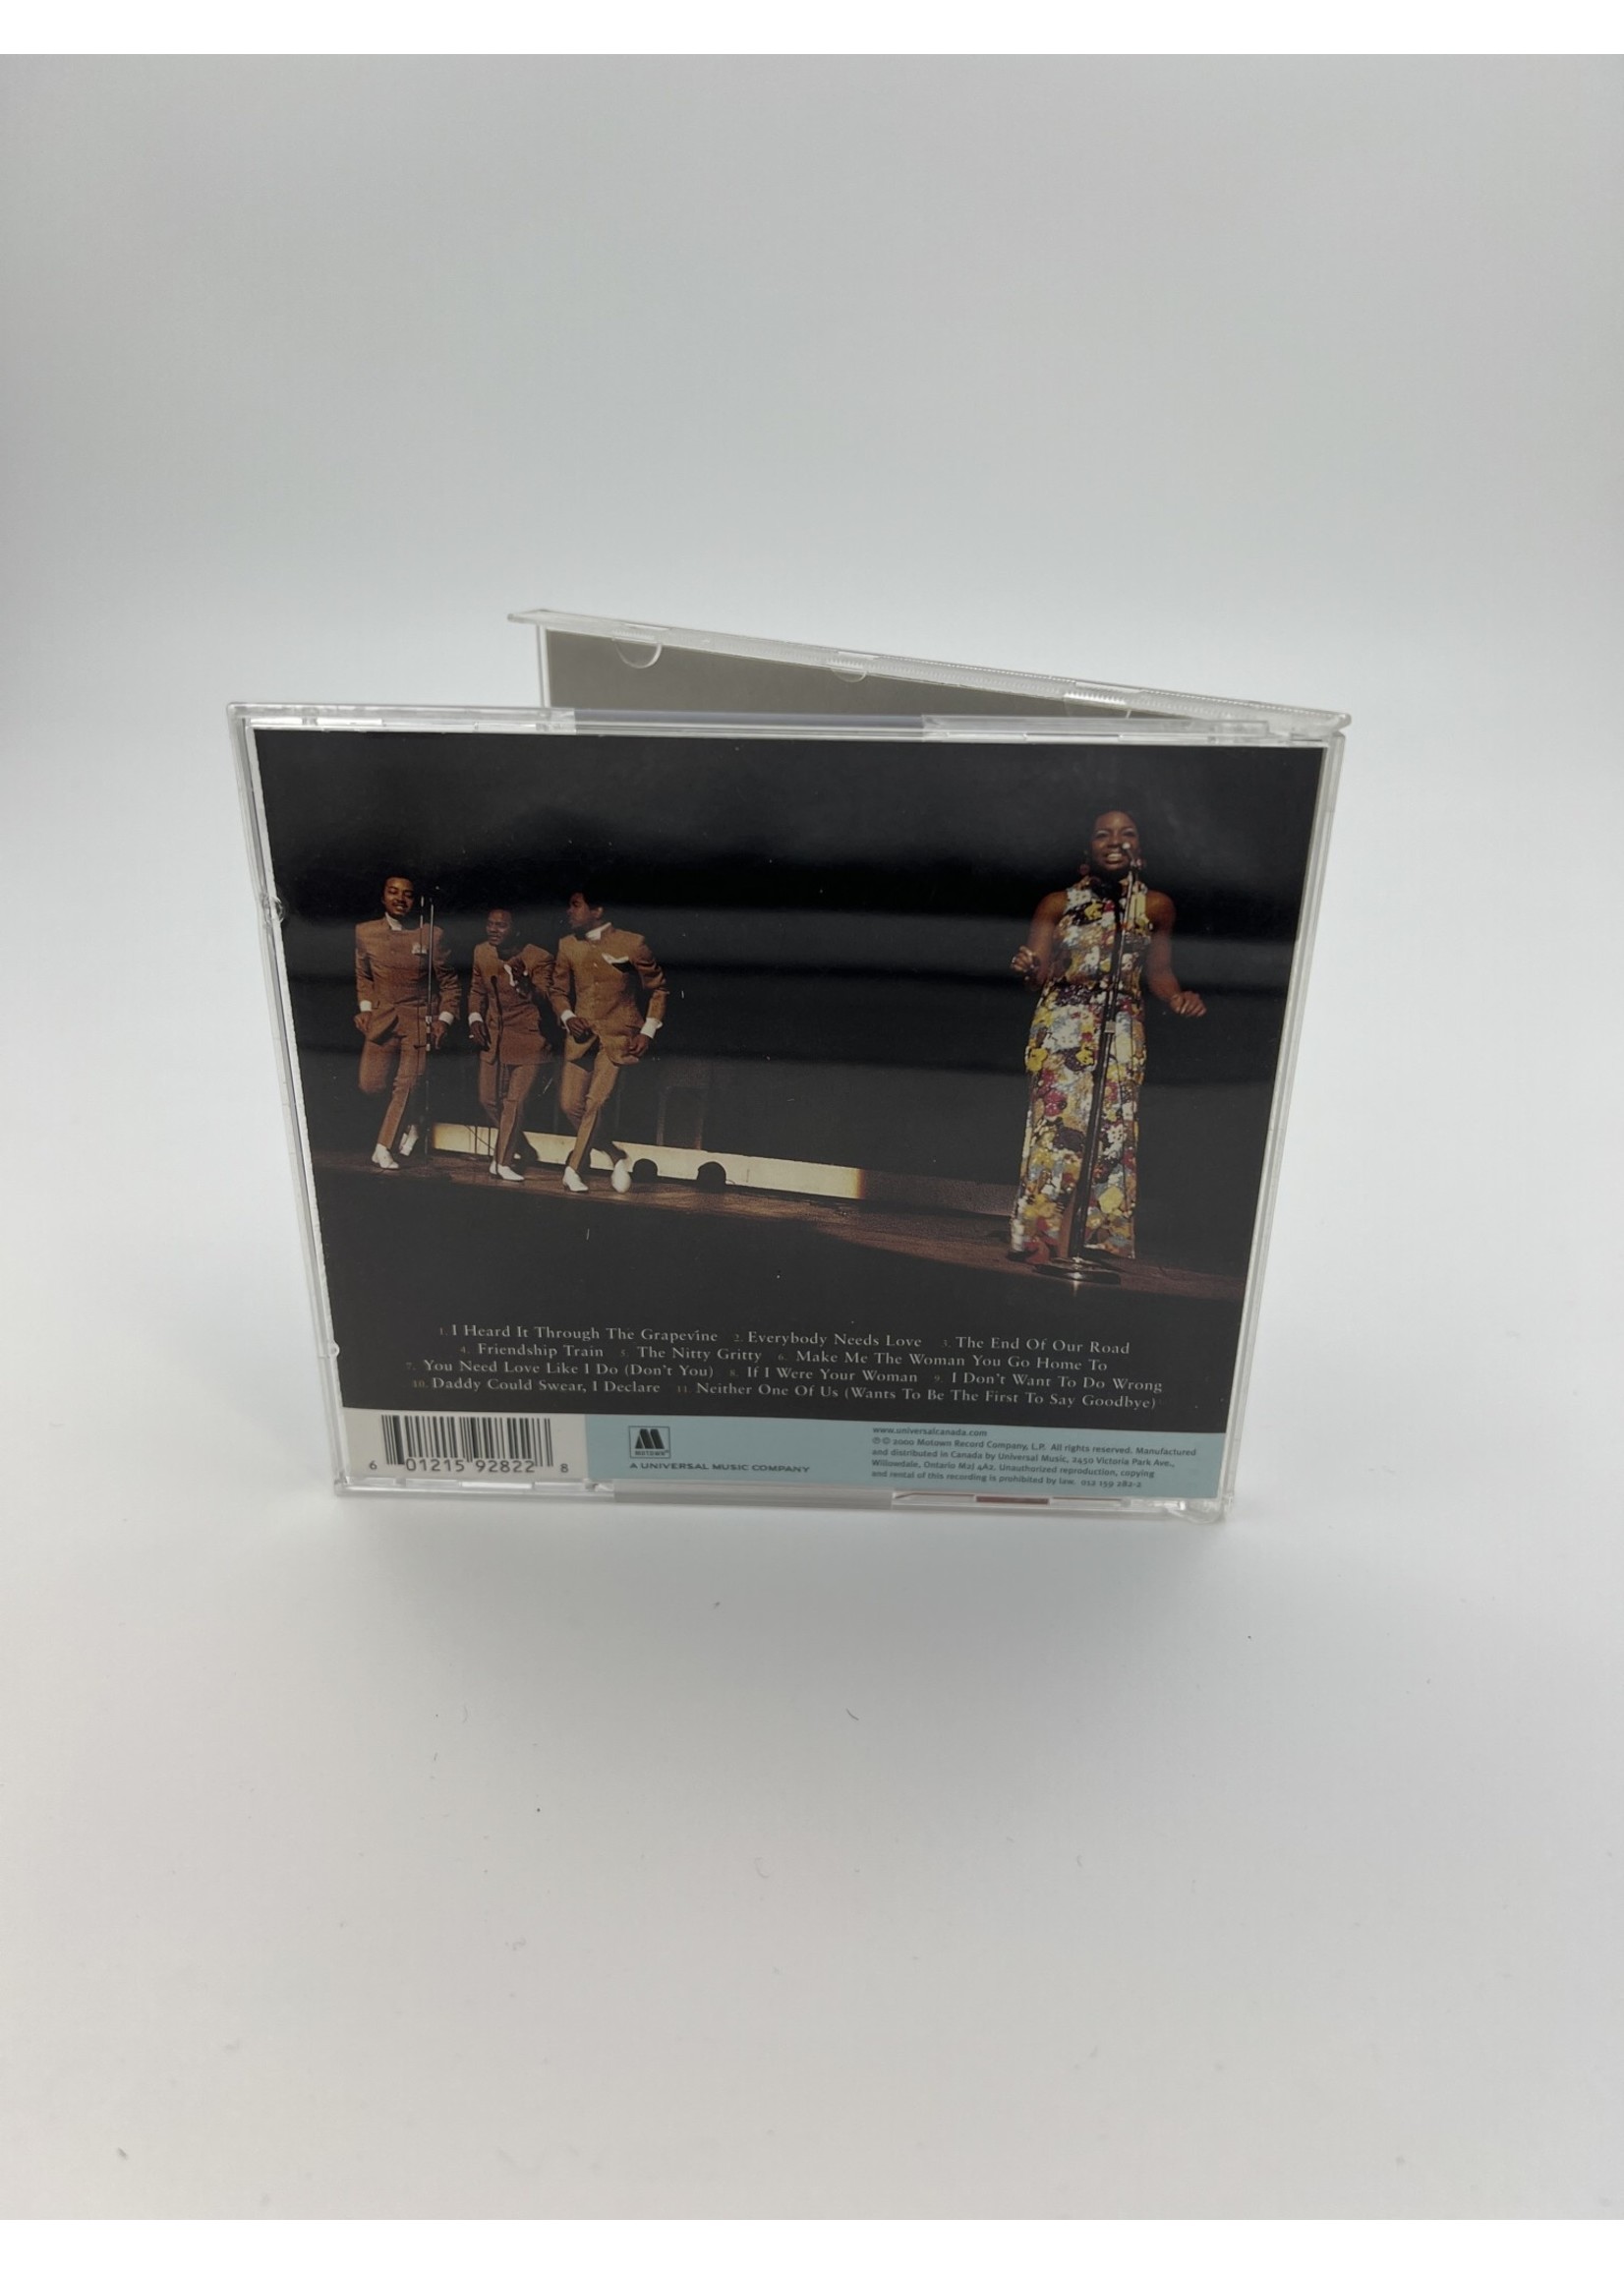 CD The Best Of Gladys Knight And The Pips The Millennium Collection Cd